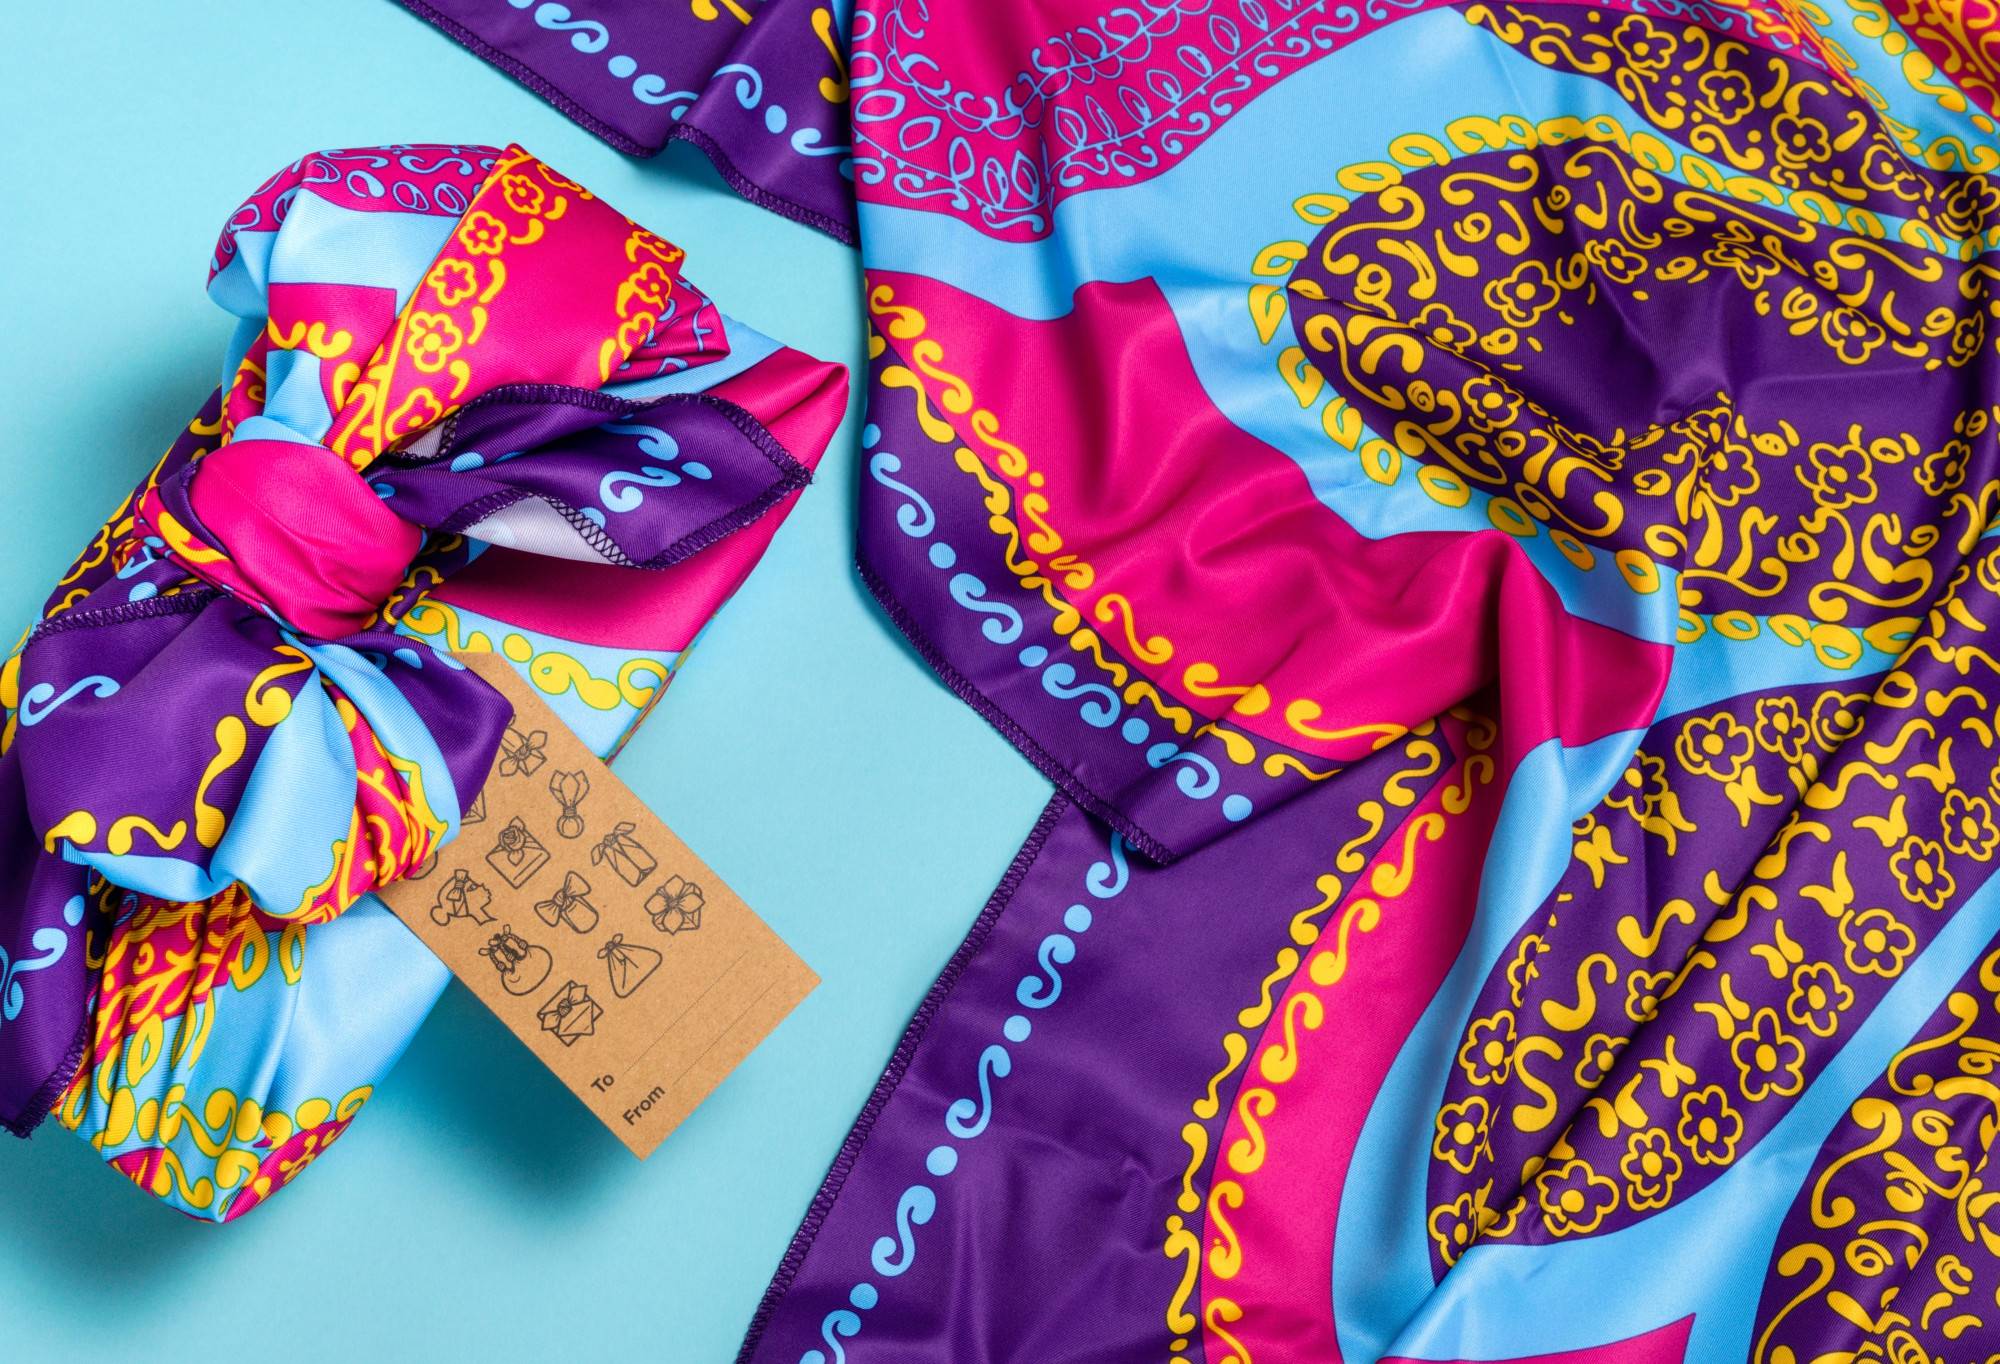 The knot wrap is wrapped around a rectangular box with a tag, as well as laid out flat, on a bright blue background.